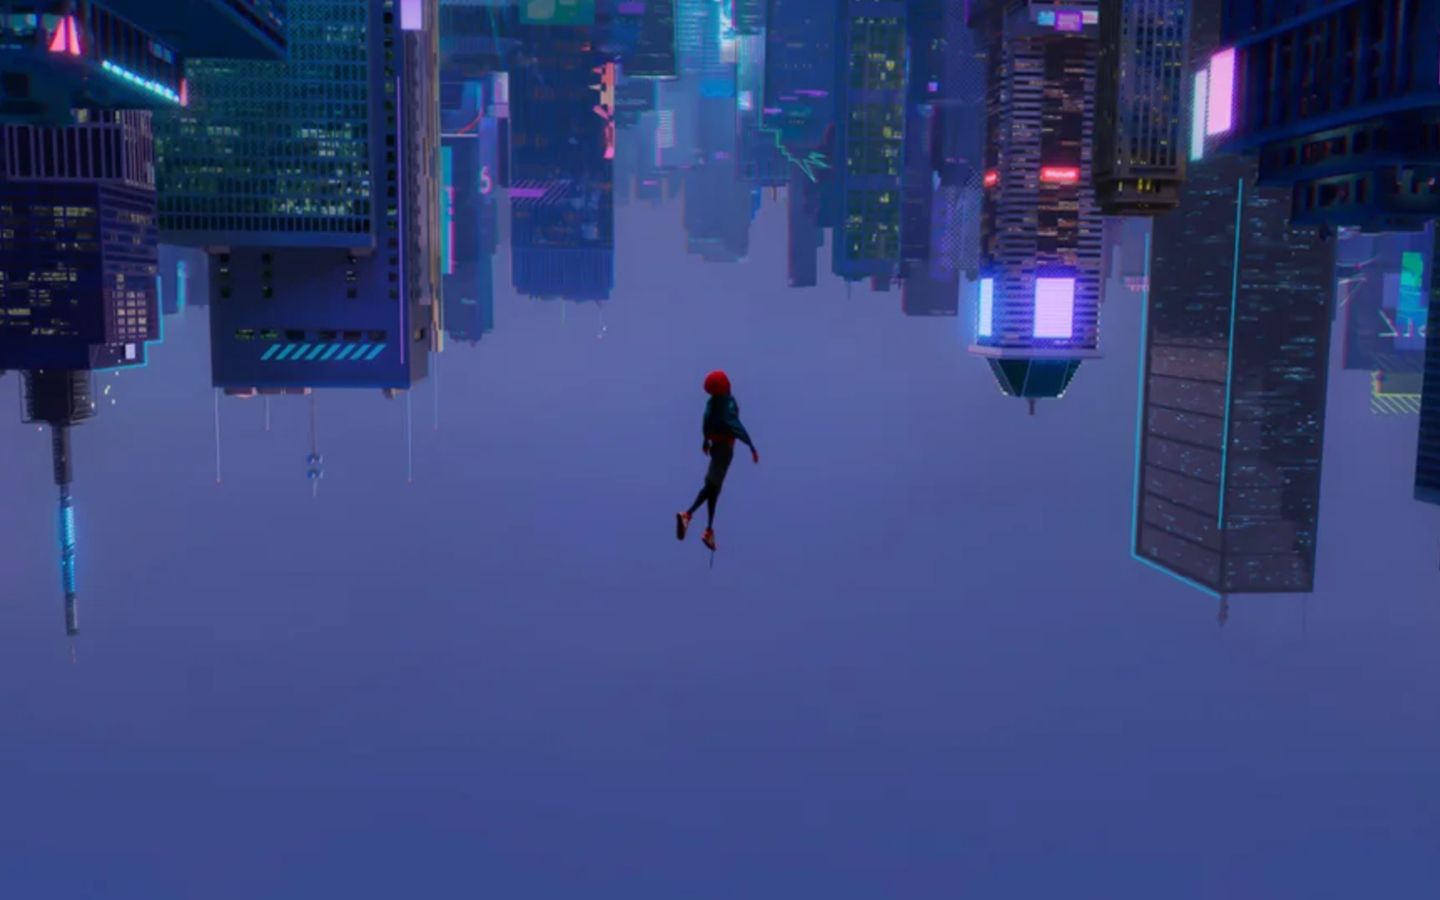 SpiderMan into the Spiderverse wallpaper in 1440x900 resolution